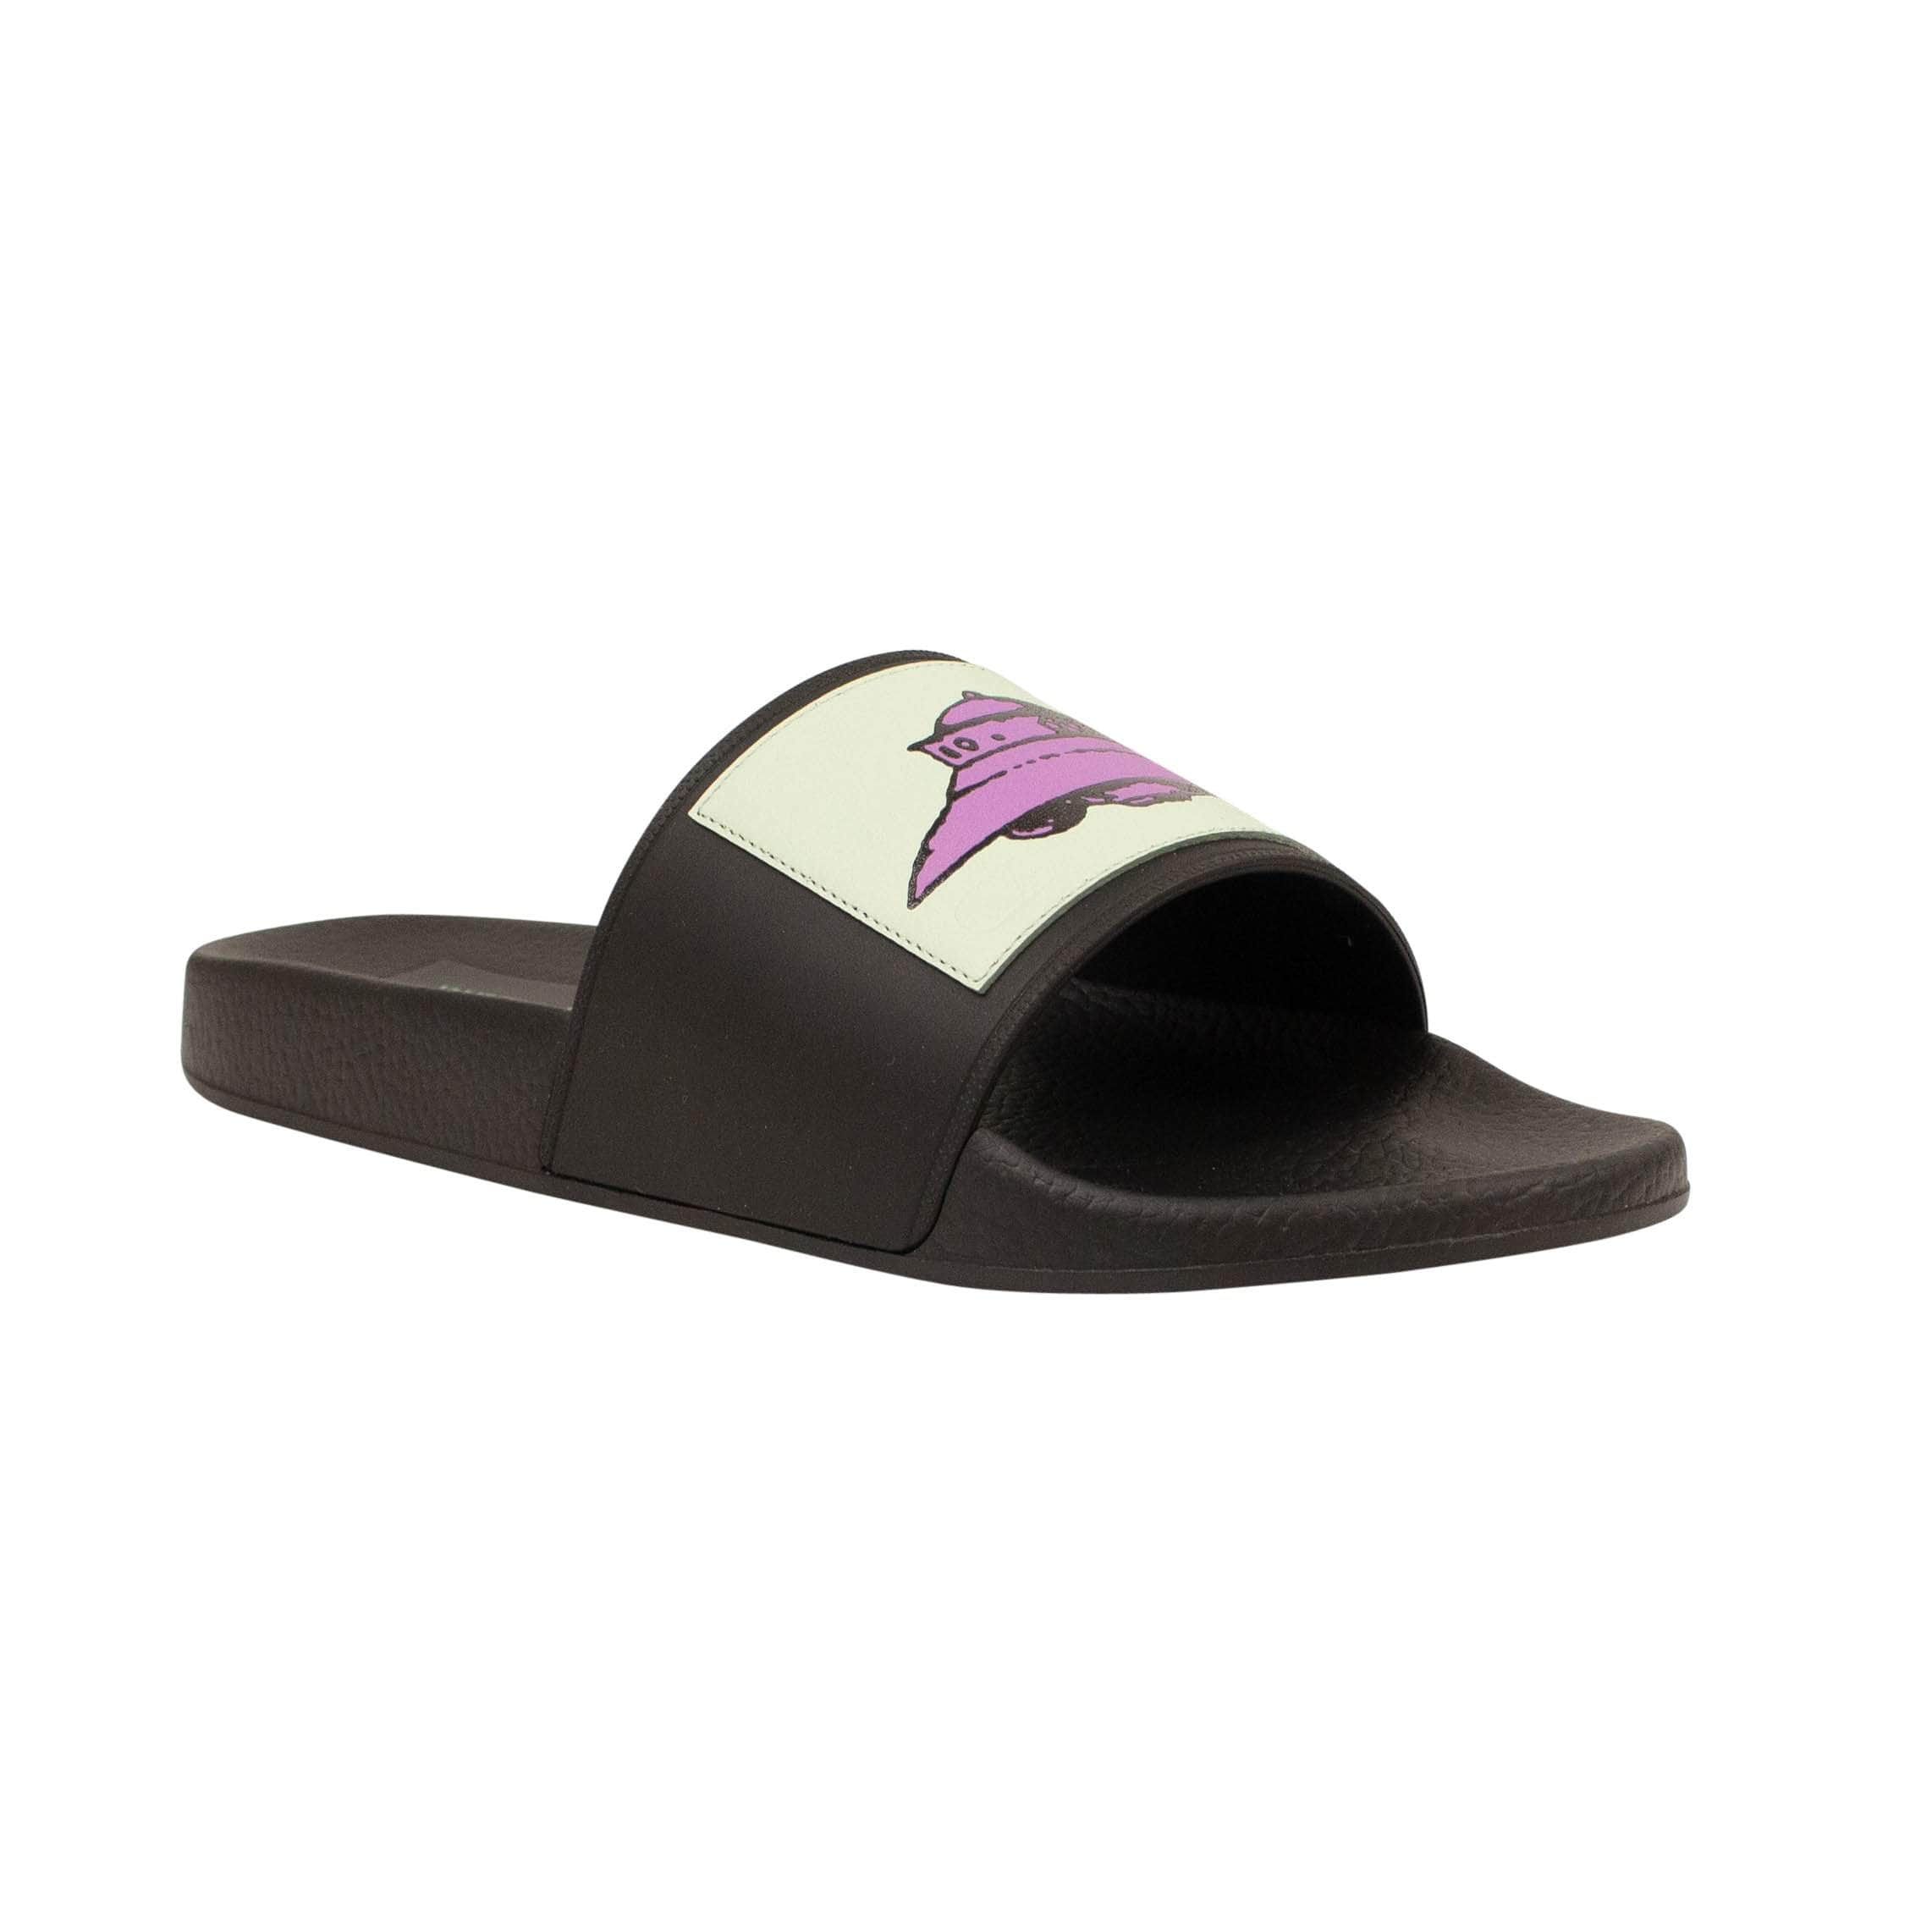 Valentino 250-500, channelenable-all, chicmi, couponcollection, gender-mens, main-shoes, mens-slides-slippers, size-39, size-40, size-41, size-42, size-43, size-44, size-45, valentino Black UFO Slides Slippers